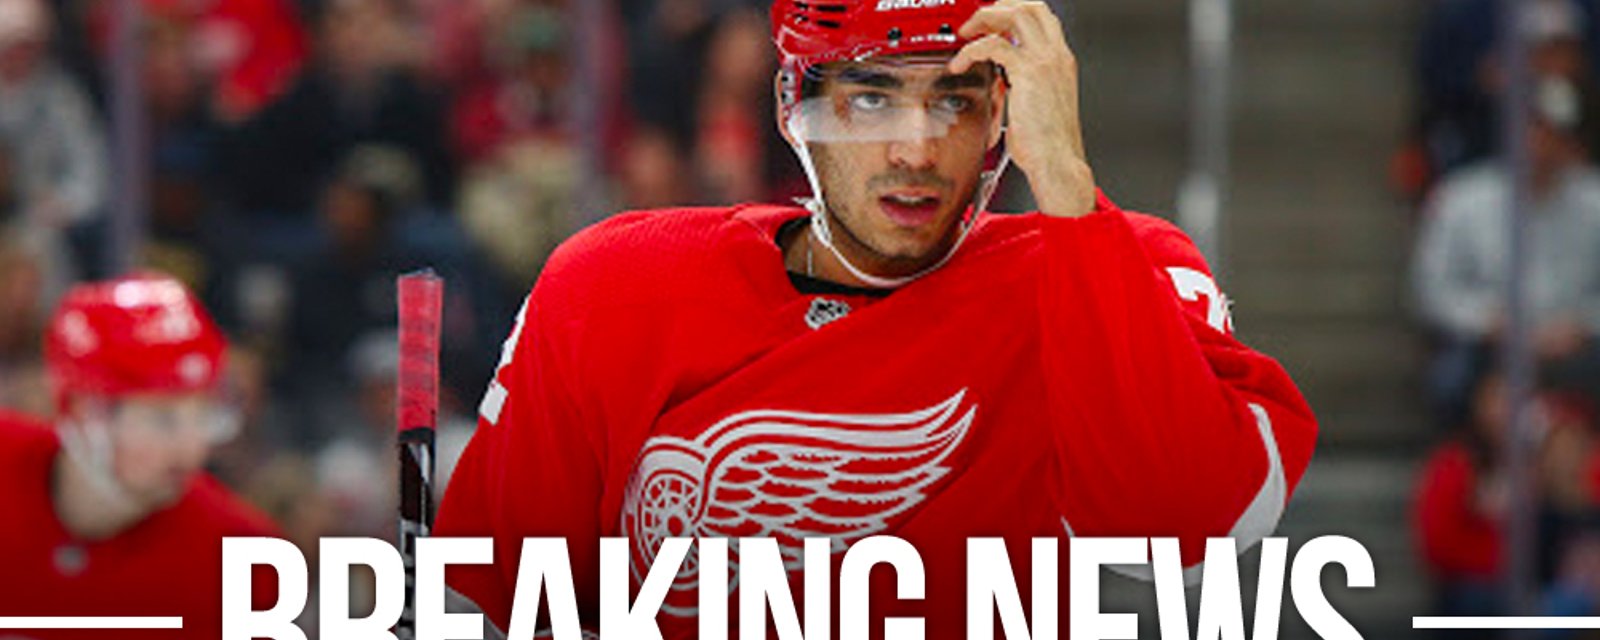 Andreas Athanasiou signs a one year deal